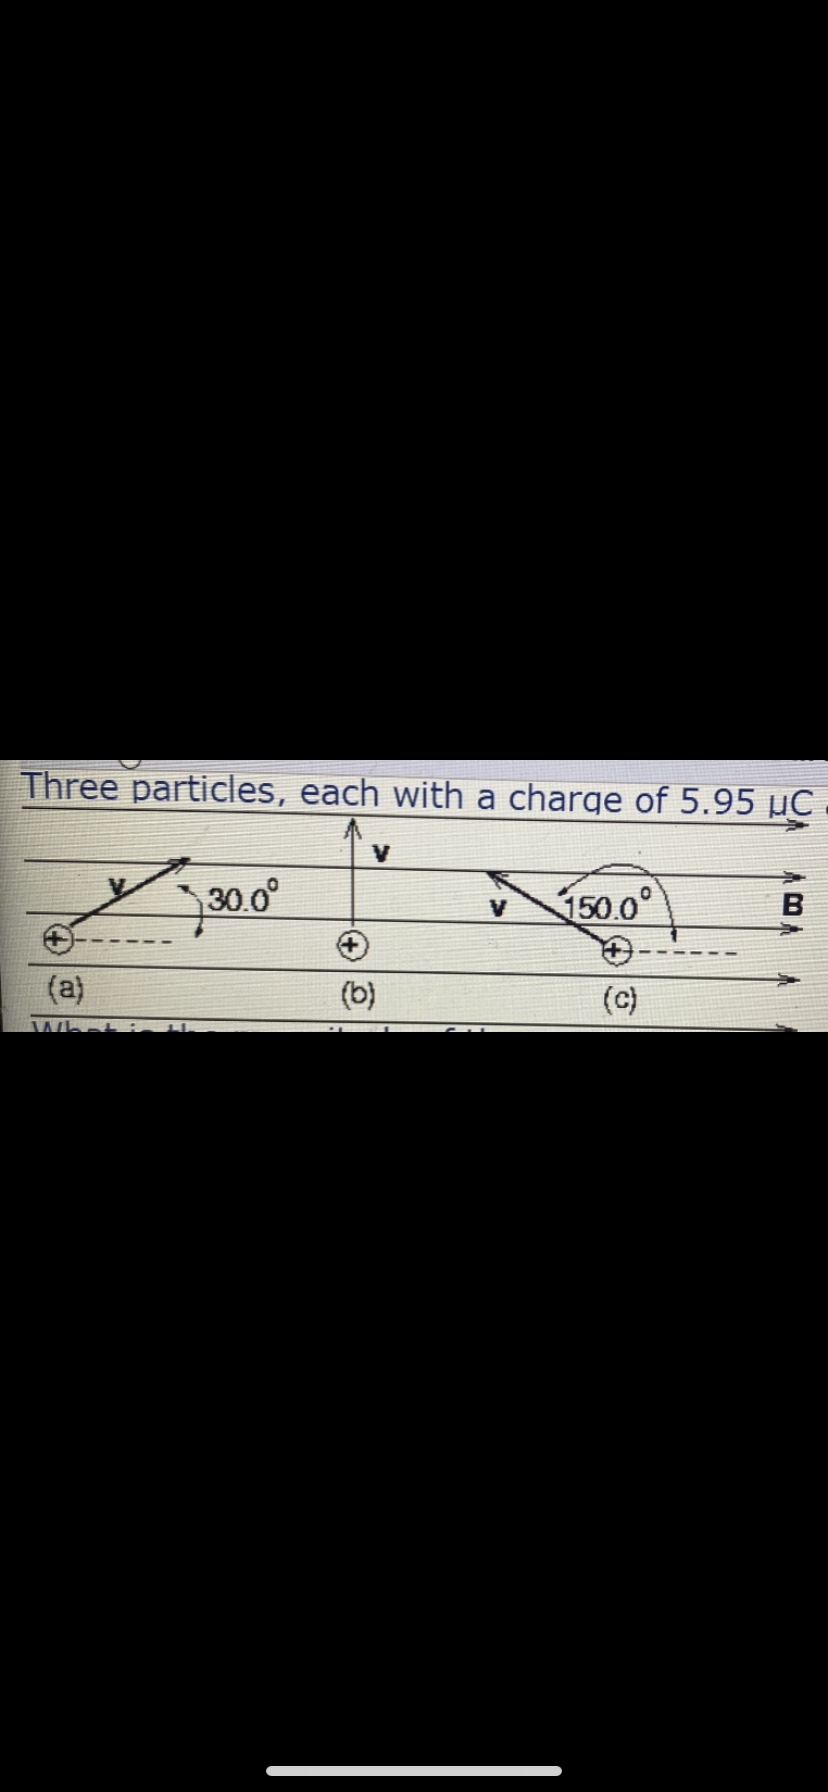 Three particles, each with a charge of 5.95 µC
30.0°
150.0°
B
(a)
(b)
(c)
